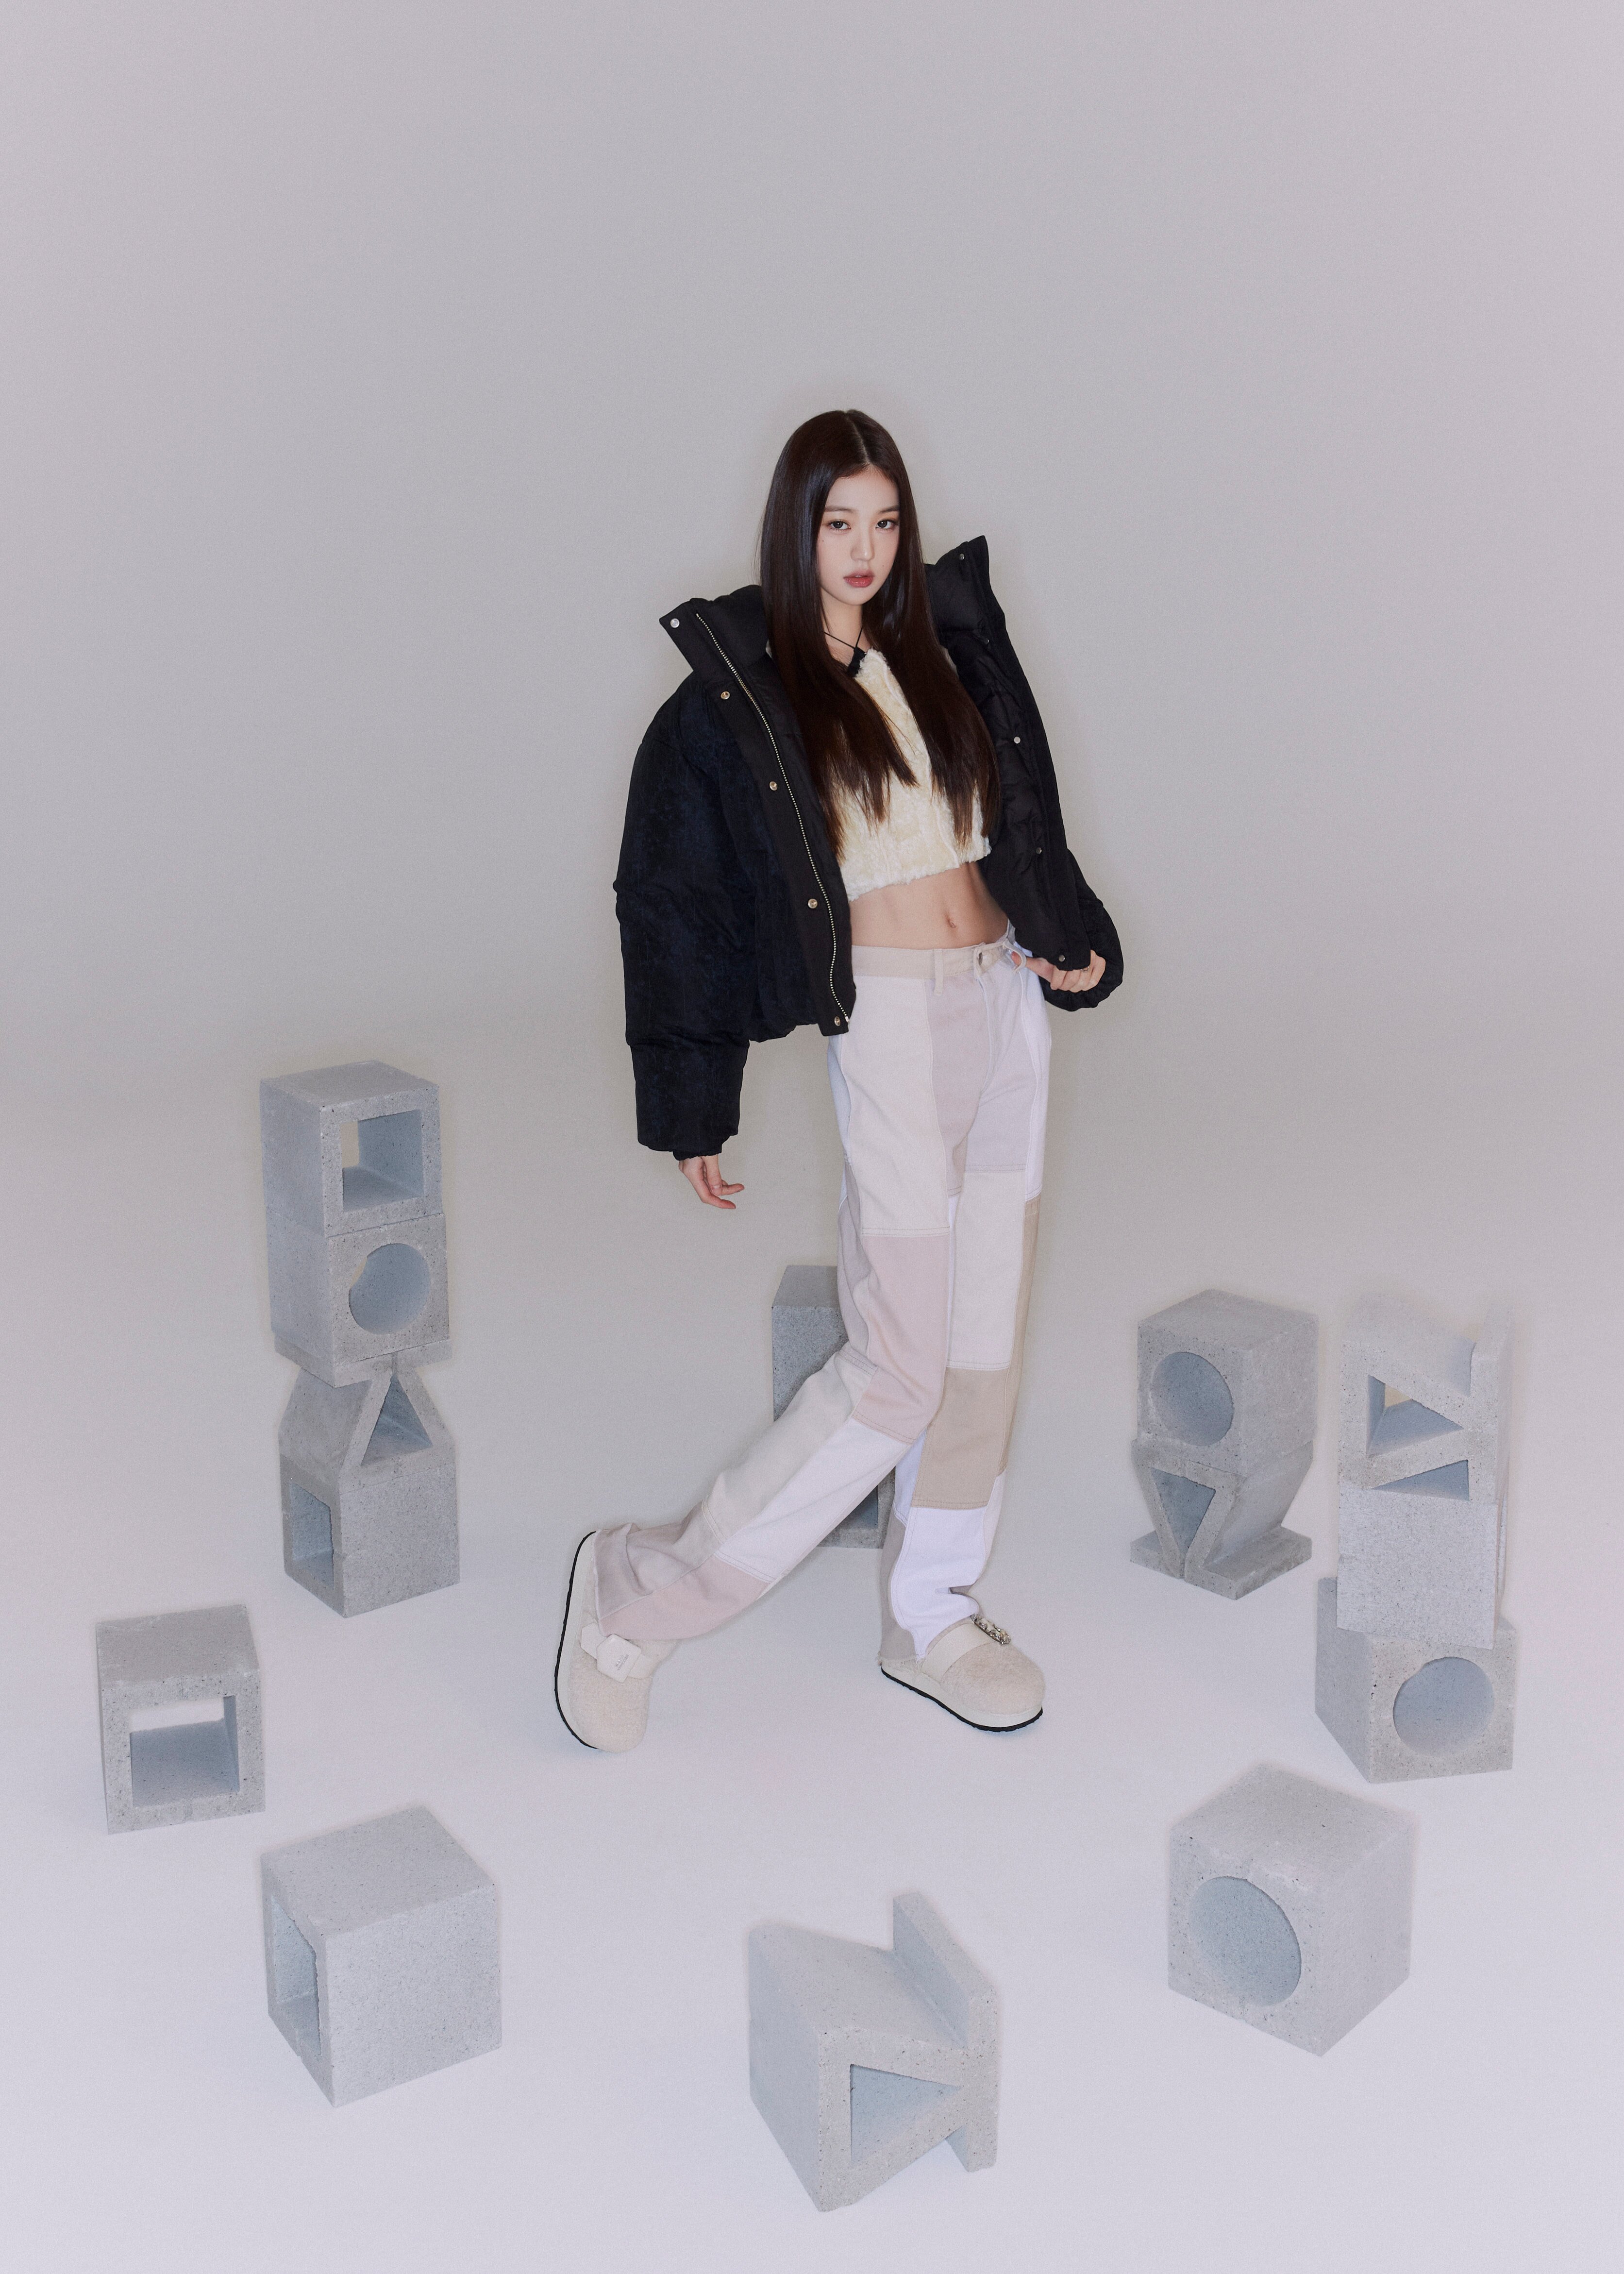 IVE Wonyoung - SUECOMMA BONNIE 2022 FW Collection 'Winter Express